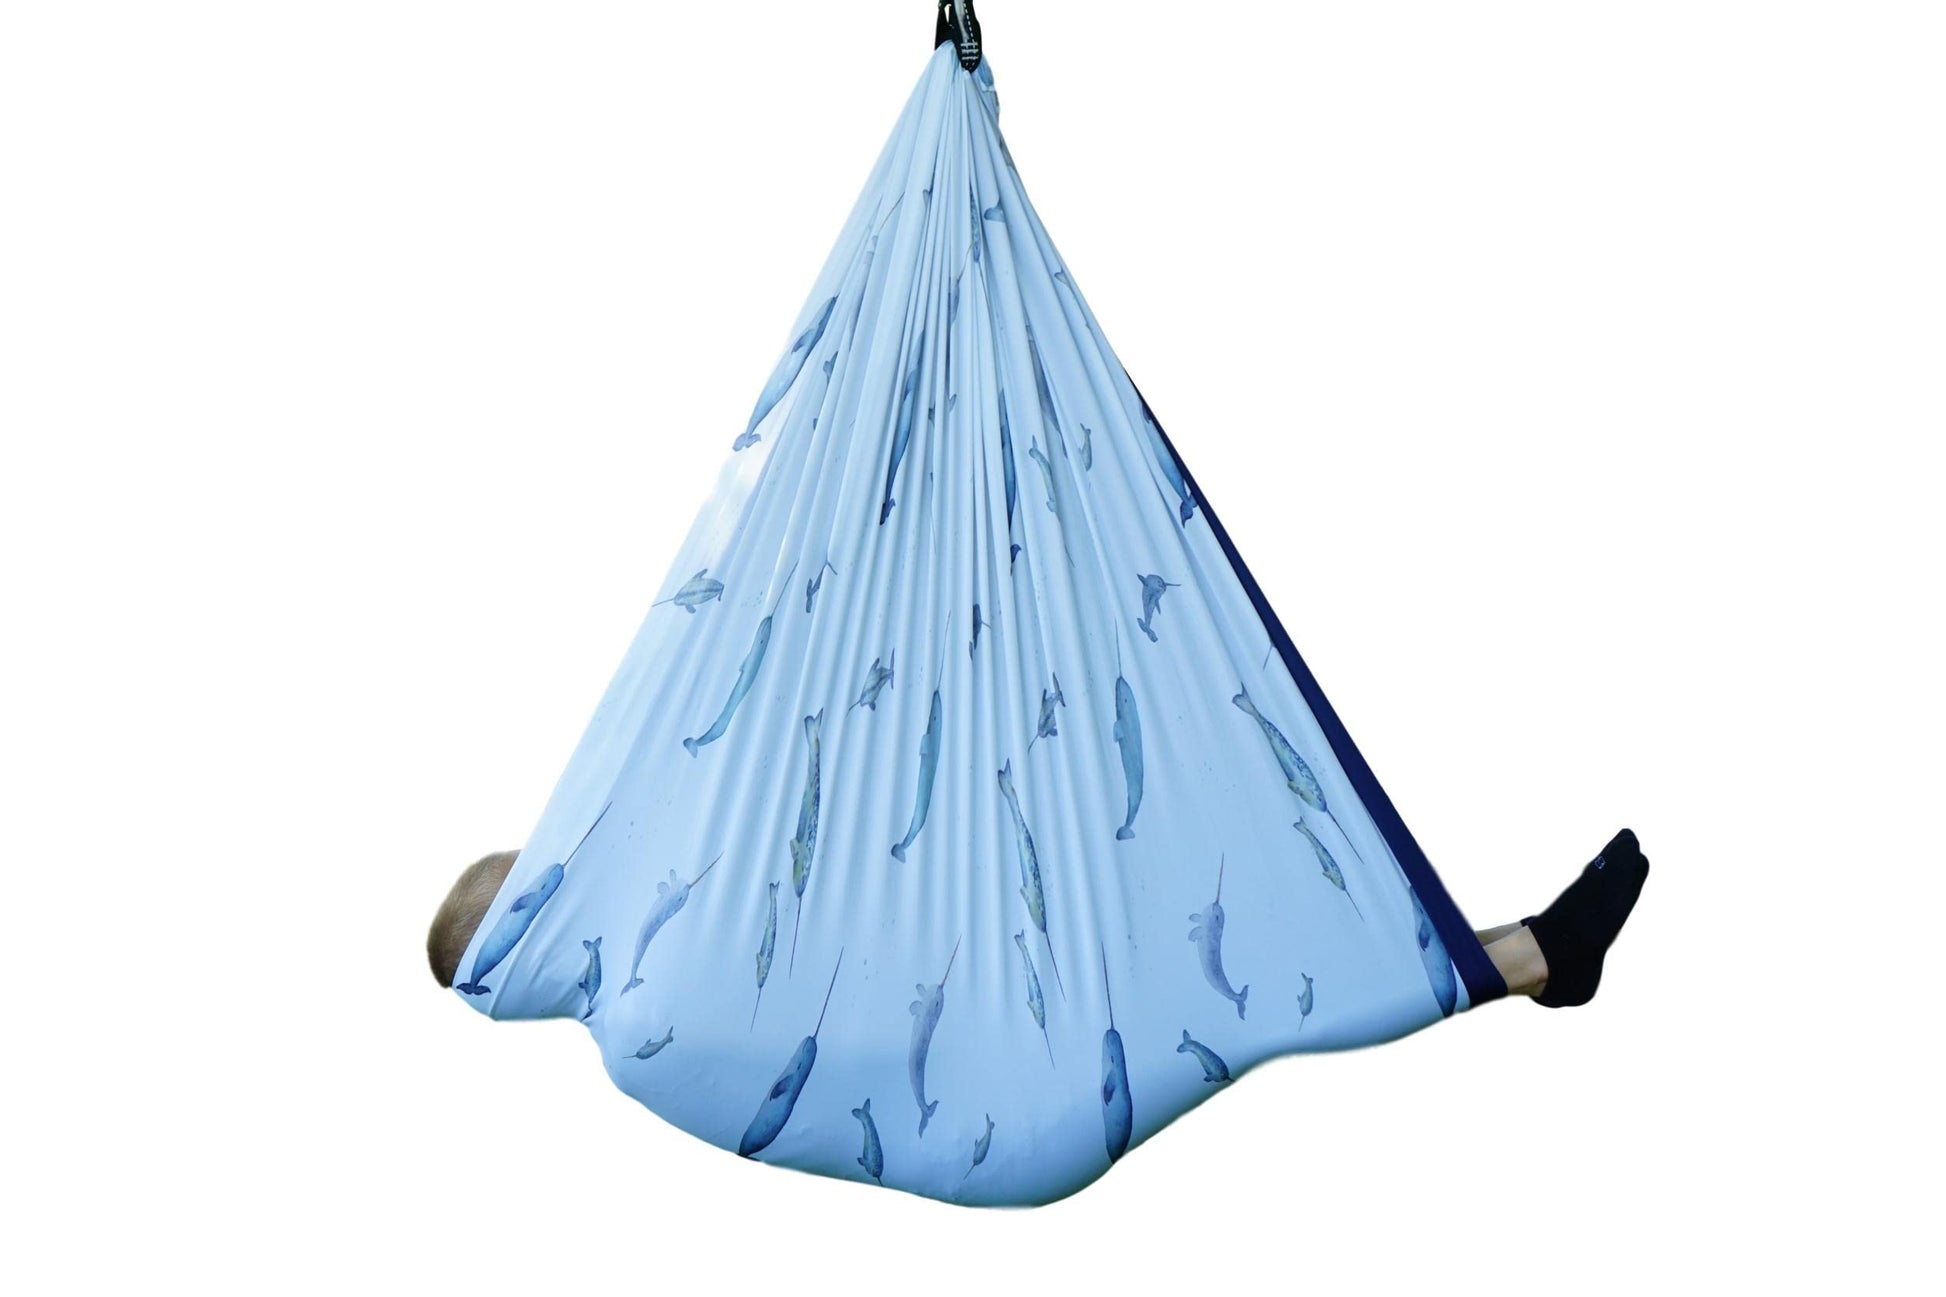 SENSORY4U Sensory Swing (Double Layered and Reversible Narwhal Print or Navy Blue Fabric) Indoor Therapy Swing Snuggle Cuddle Hammock Cacoon for Children with Autism ADHD and Aspergers